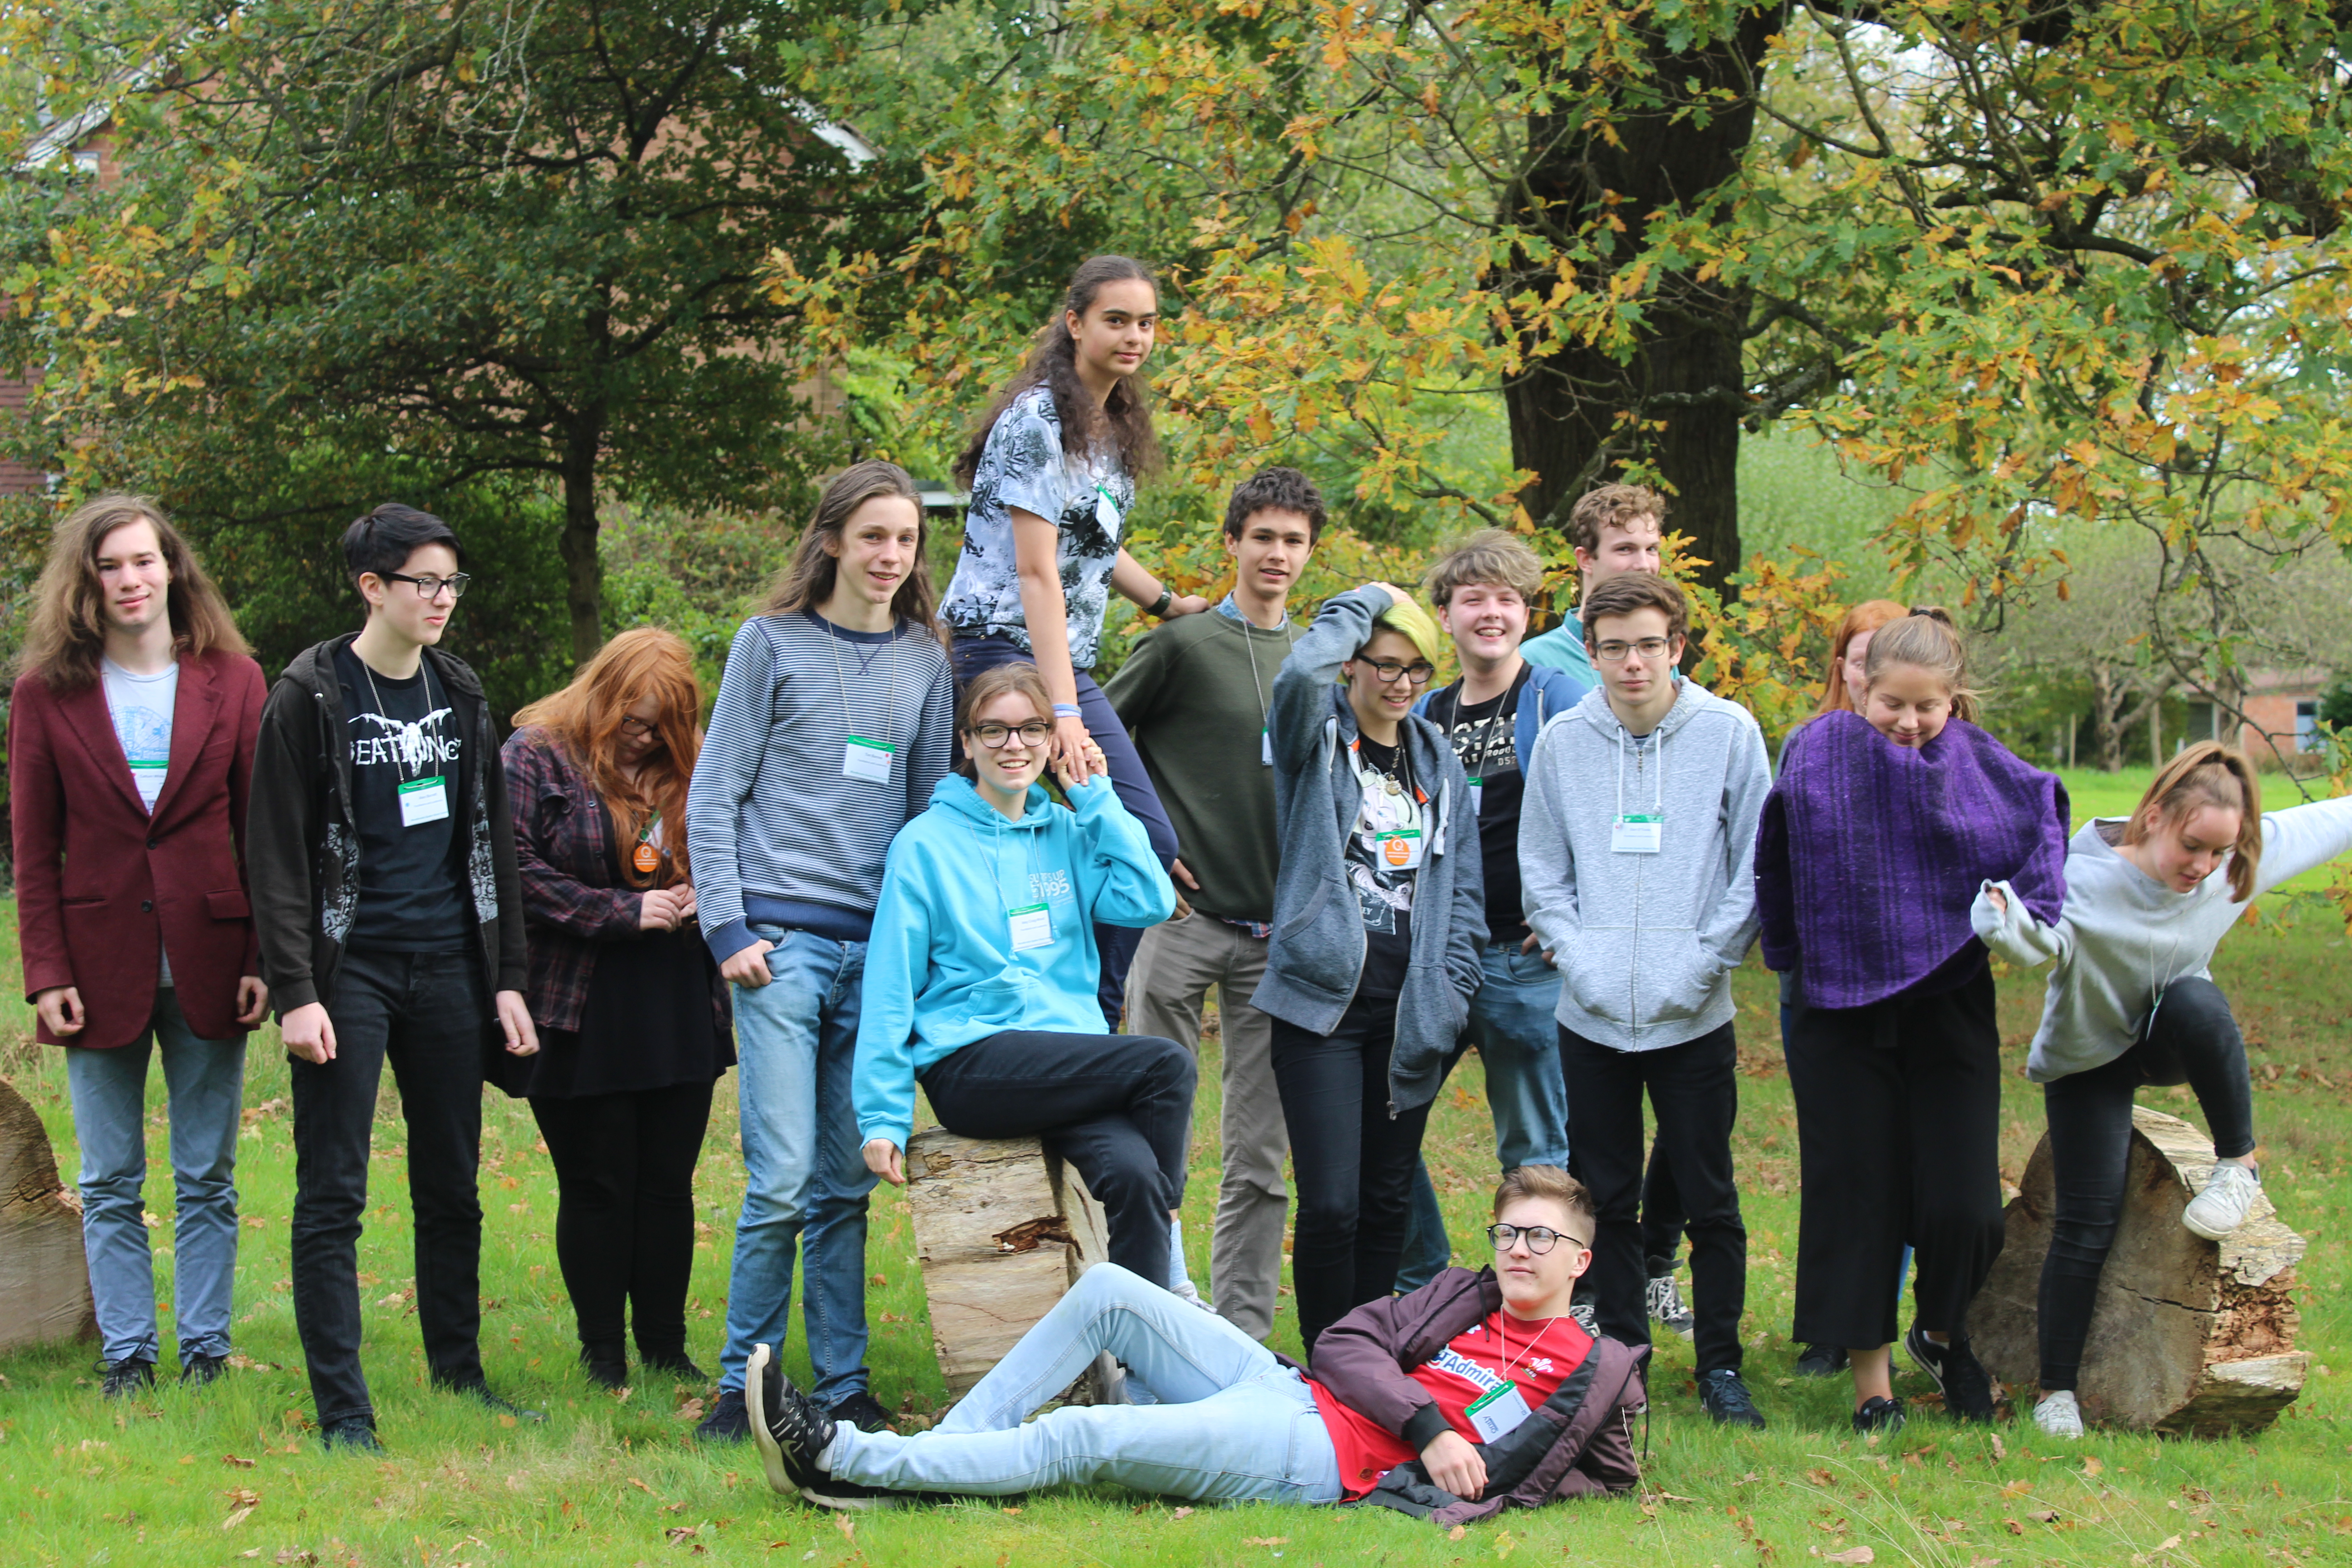 Group of young people posing in a garden in autumn